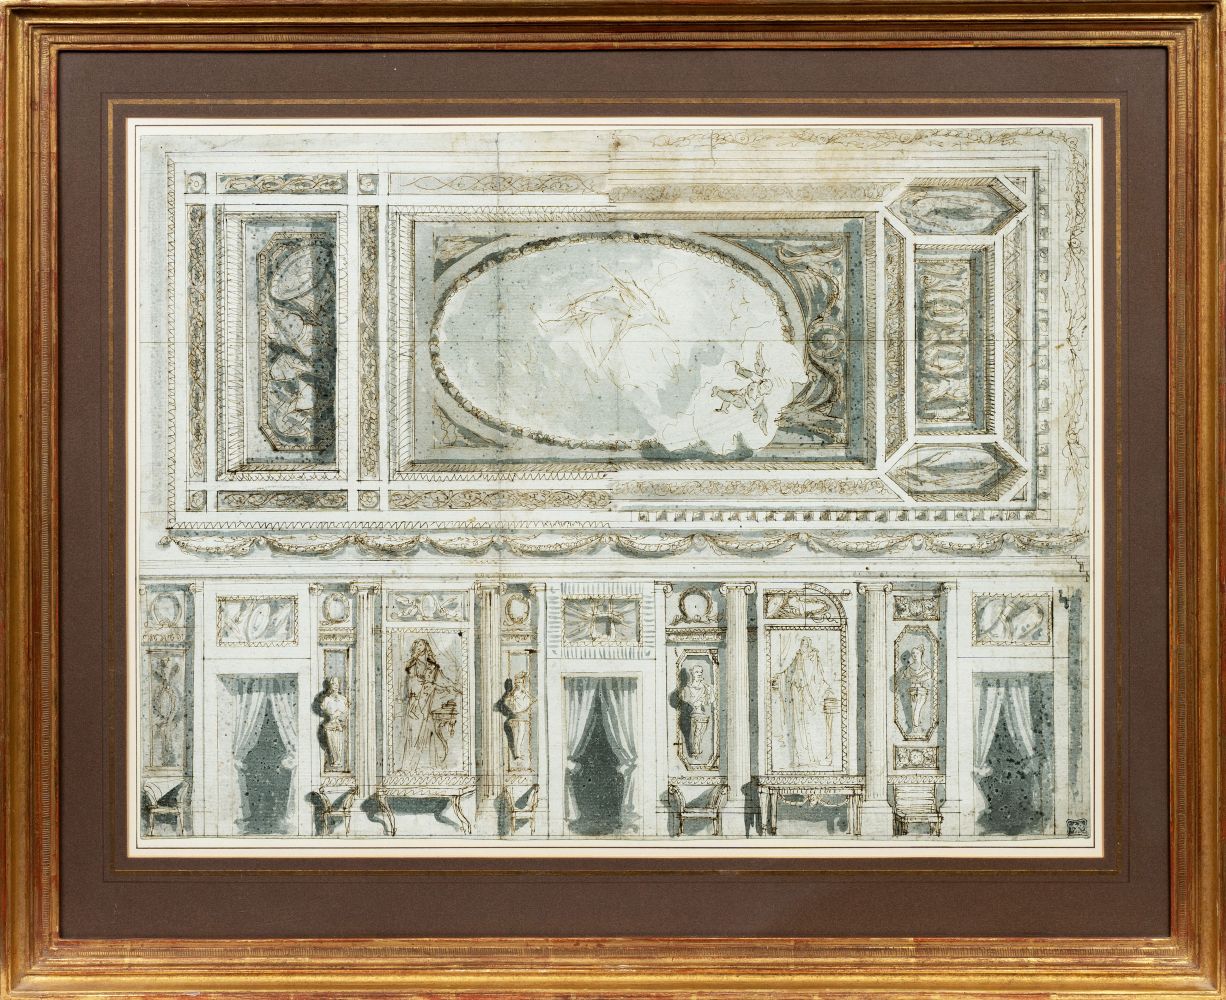 Design for Wall and Ceiling of a Palace - image 2